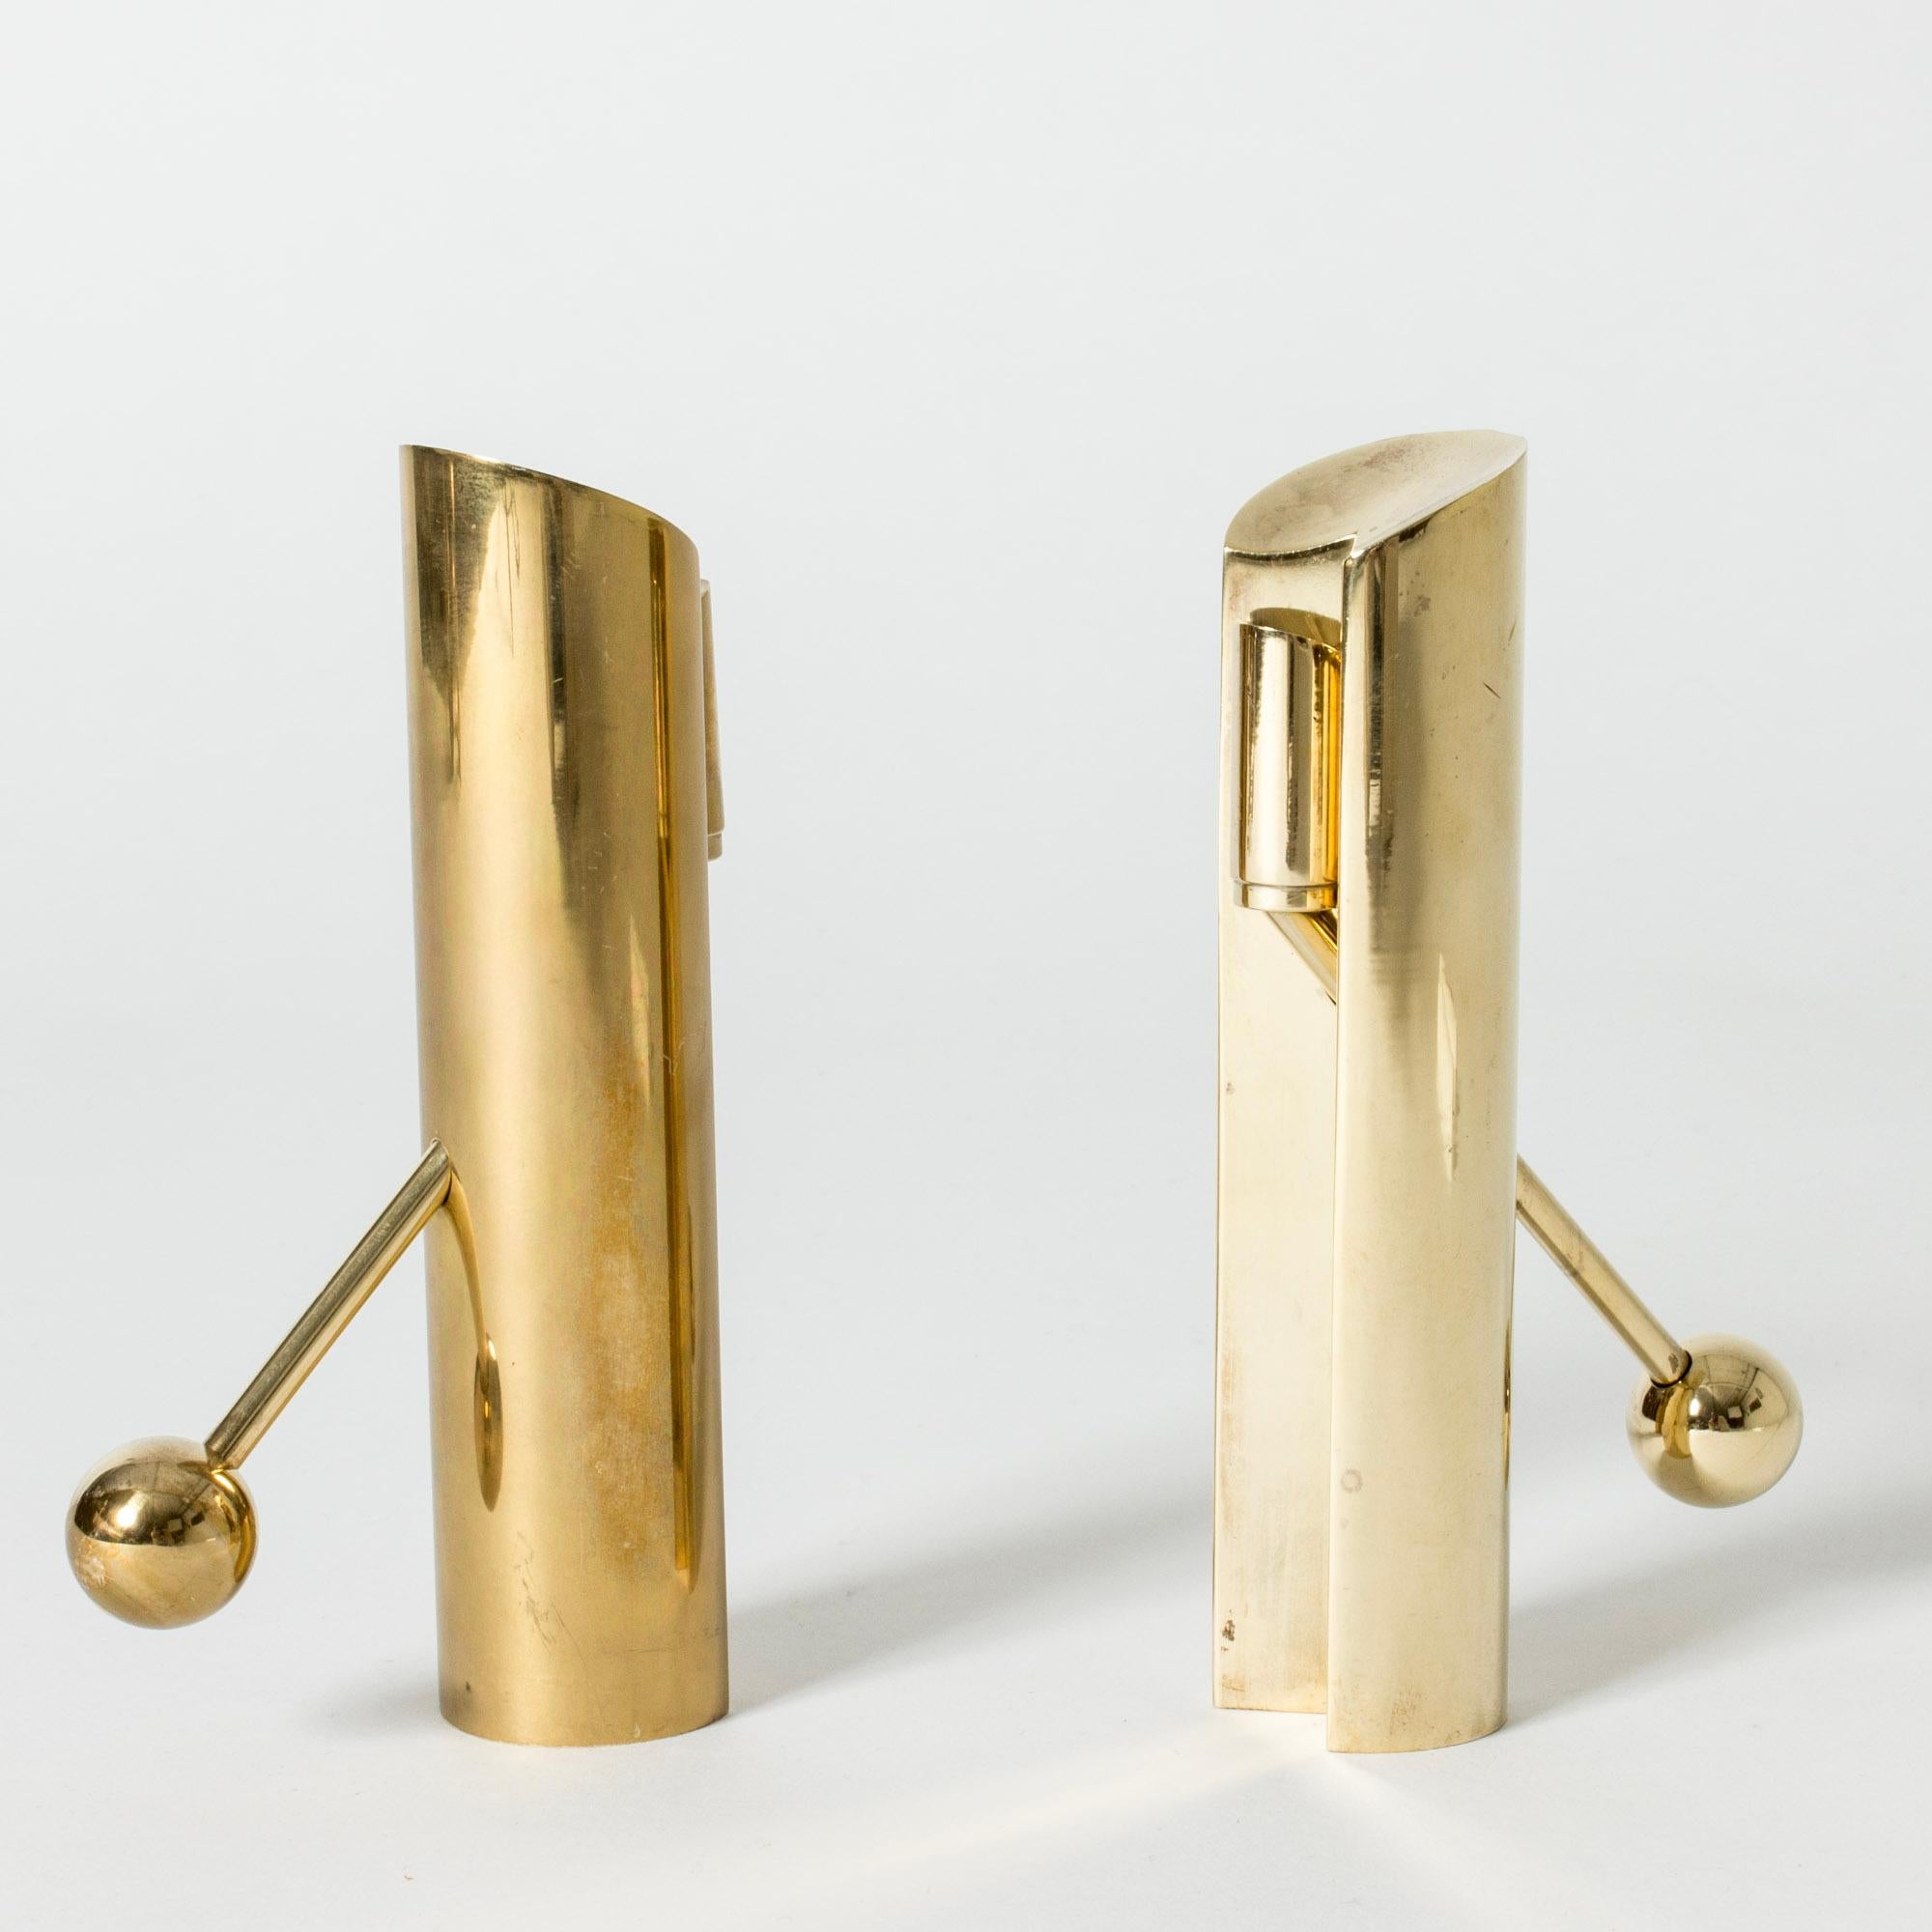 Pair of heavy, solid brass “Variabel” candlesticks by Pierre Forssell. The diagonal arms slide through the bases to fasten the candle. The design springs from Forssell’s idea that the whole candle should be visible as it burns.

Pierre Forssell was